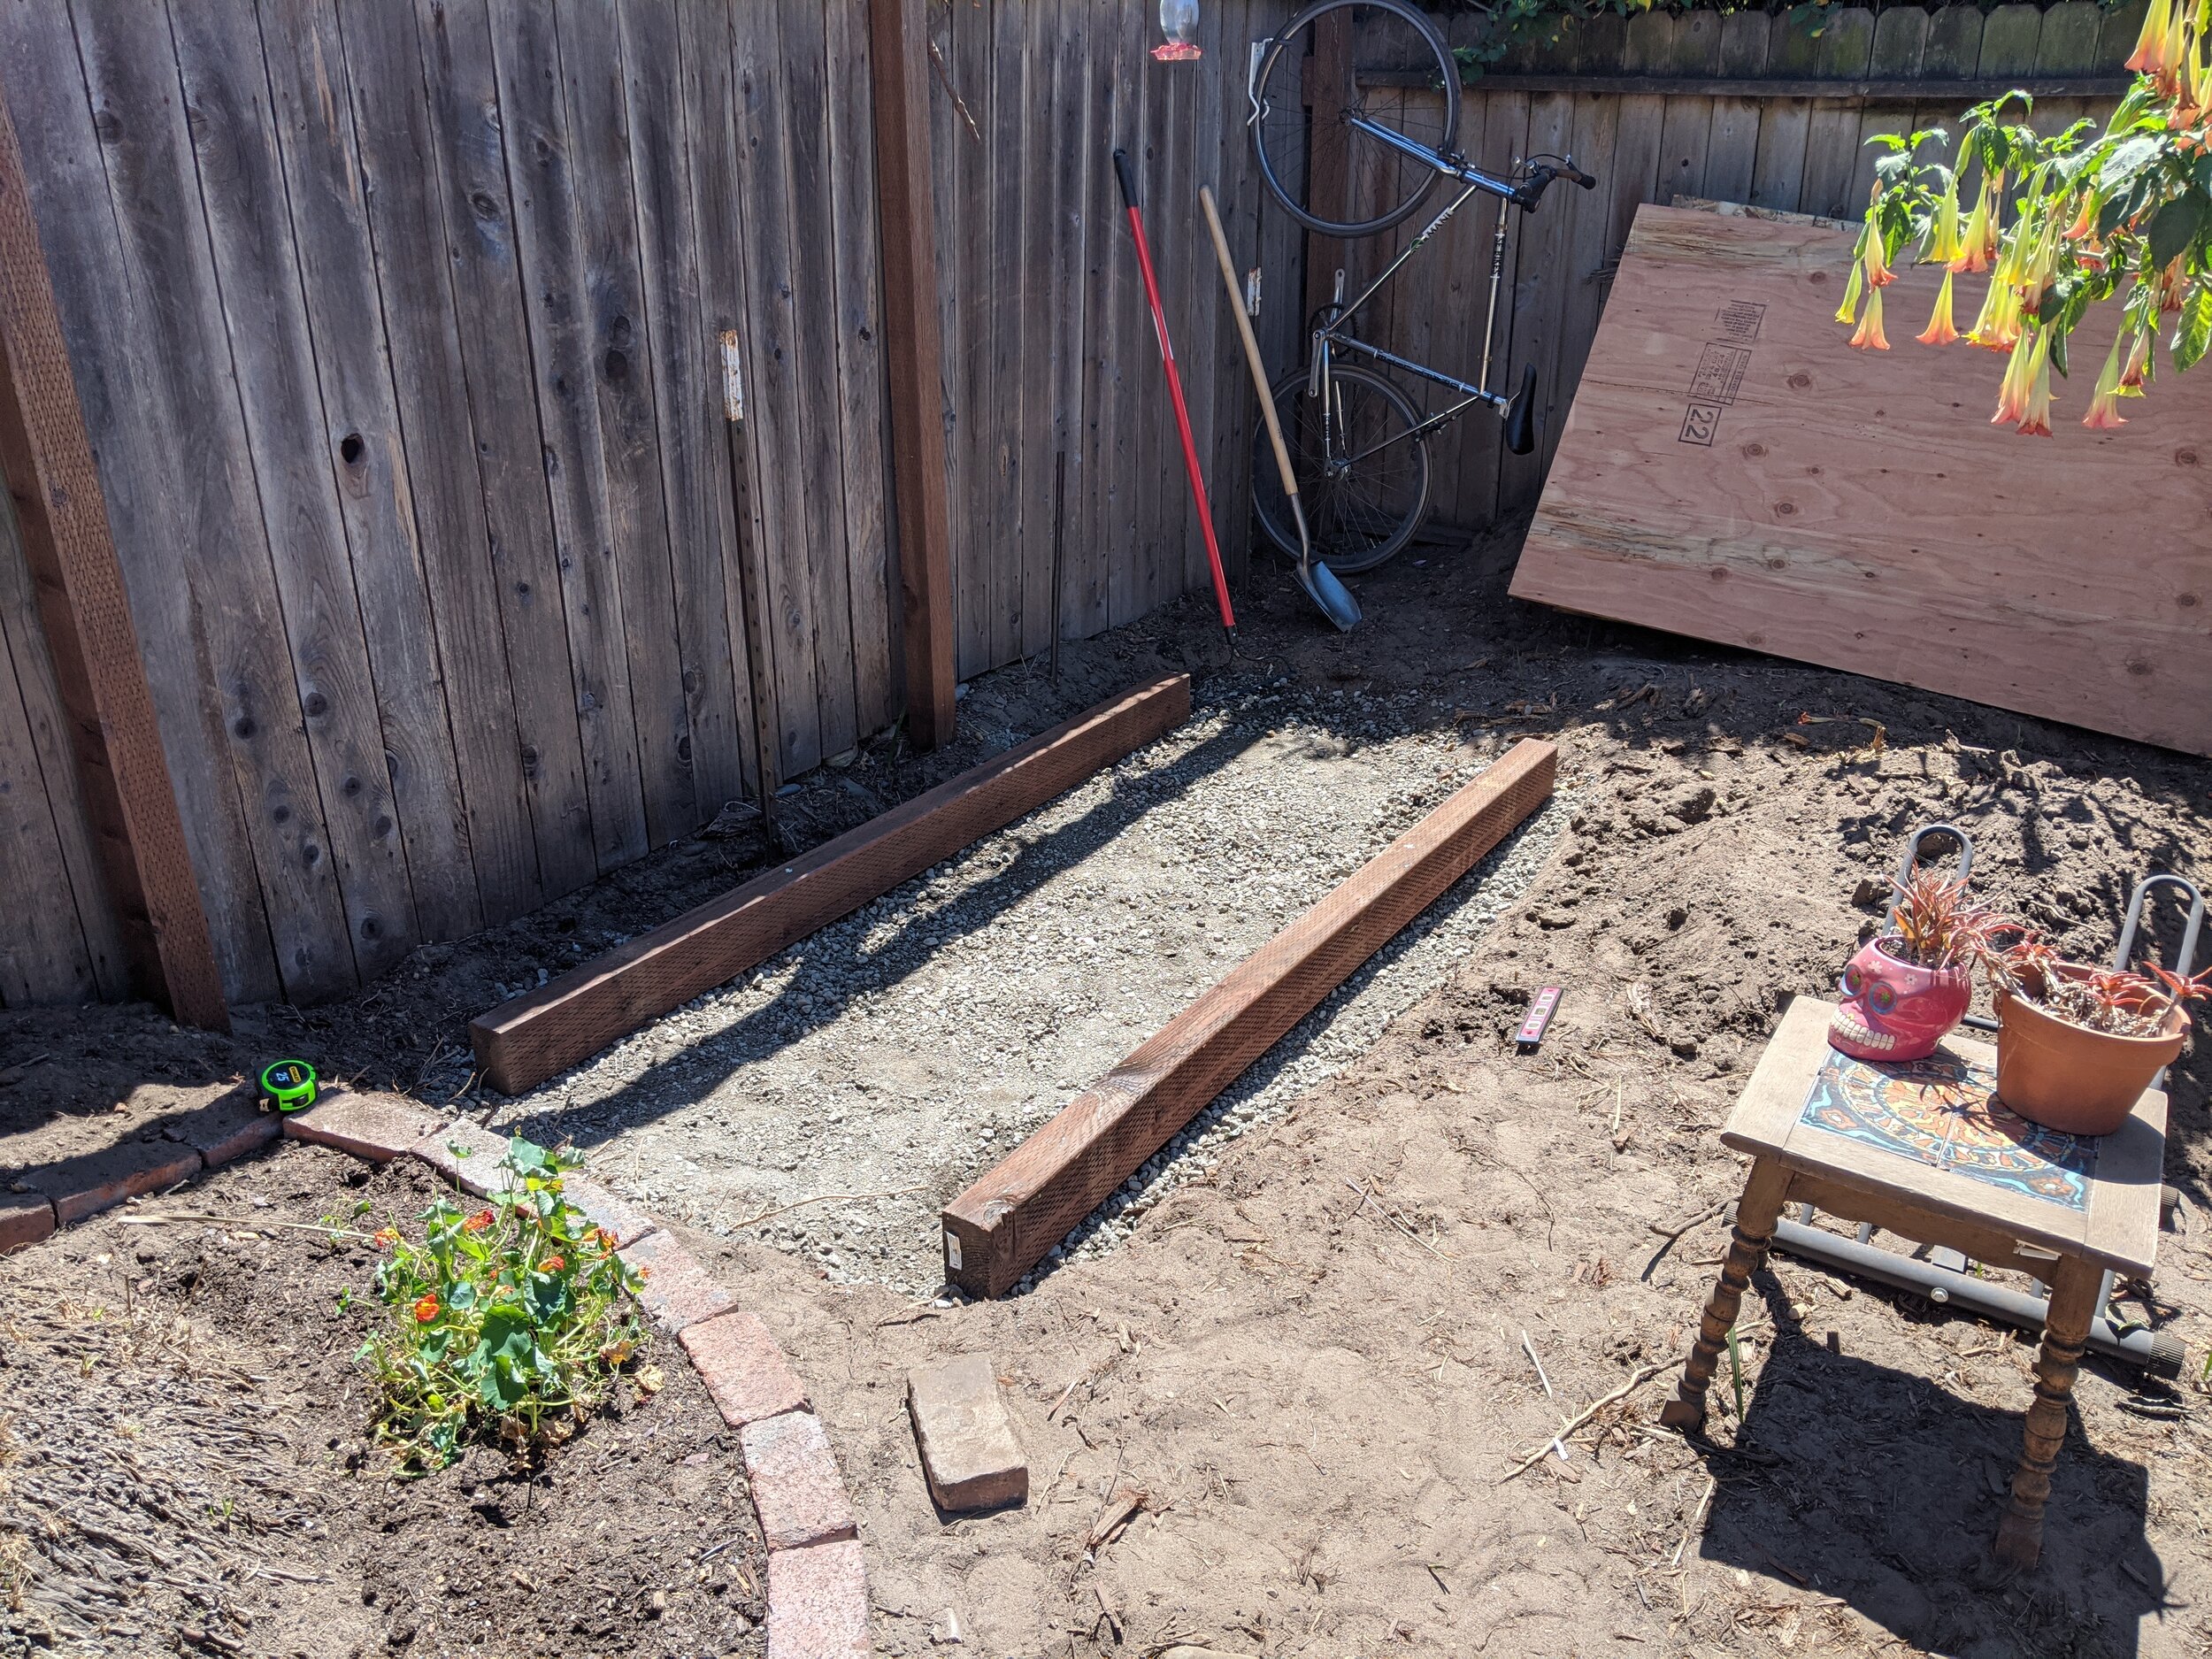  I used many bags of crushed stone as the foundation, which will prevent the shed from sinking over time by allowing rainwater to drain. Once they were in place and leveled, two 8’ pressure-treated 4 x 4s were used to act as a solid base. 